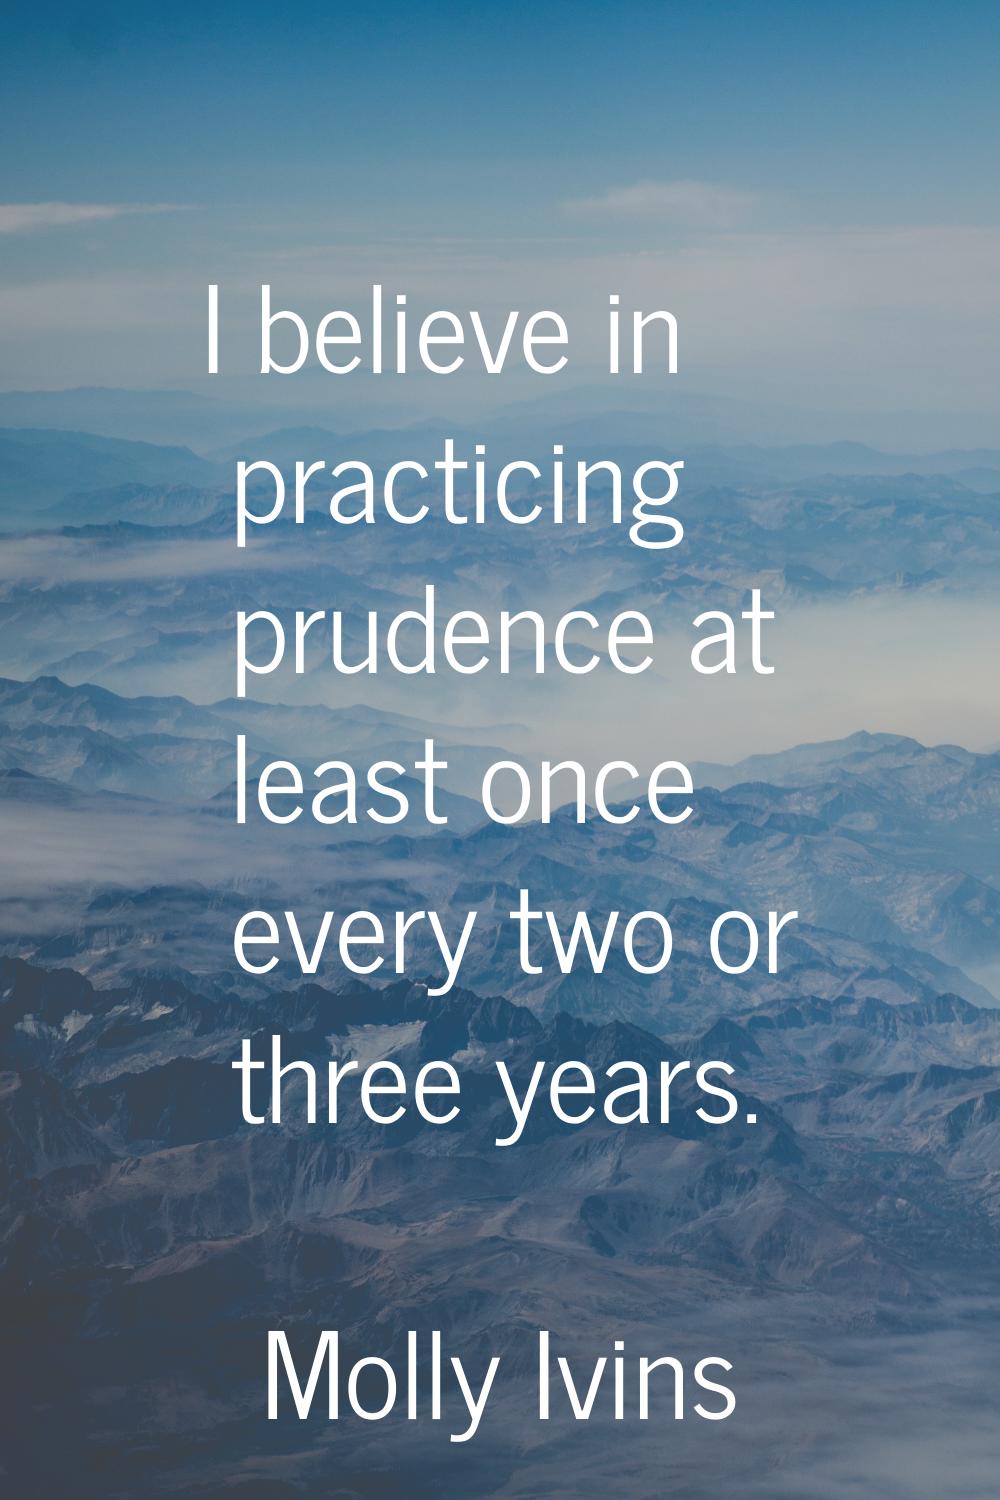 I believe in practicing prudence at least once every two or three years.